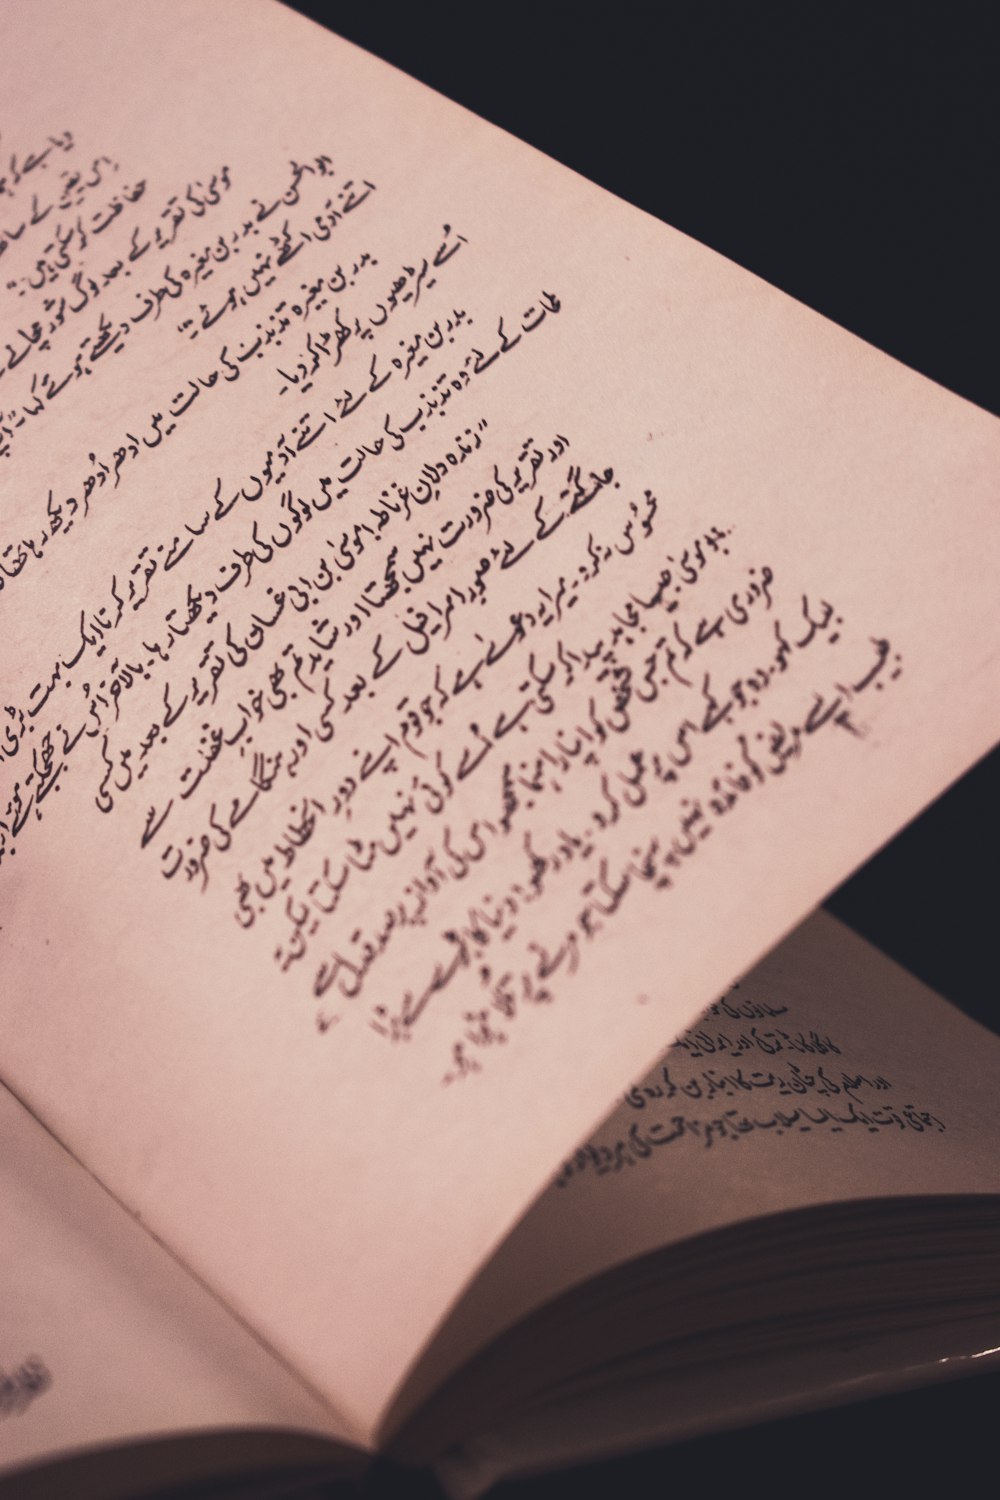 a close up of a book with writing on it